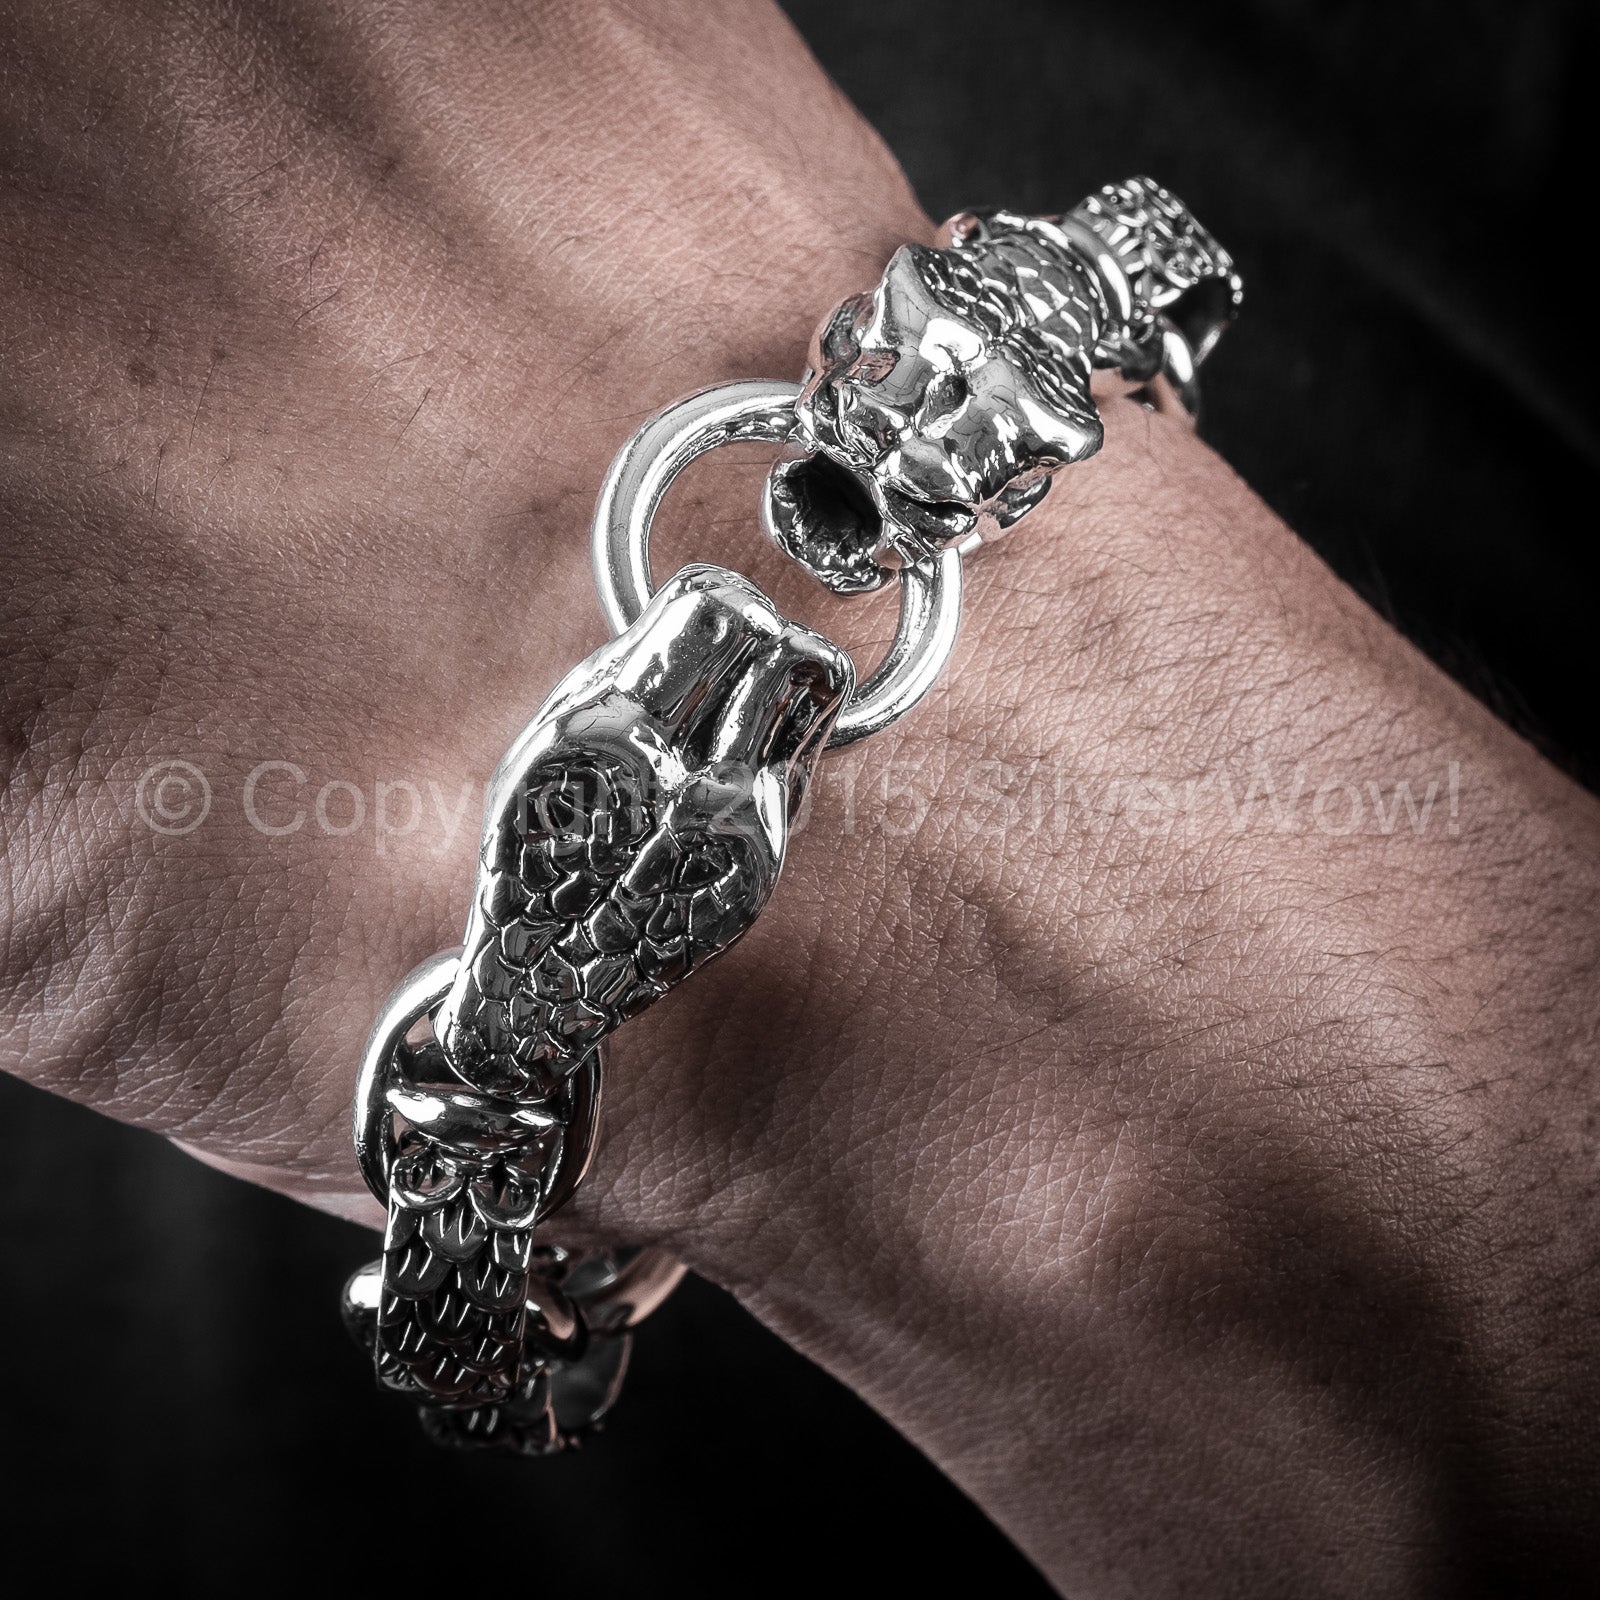 Snake Head Bracelet With Skull Toggle Clasp